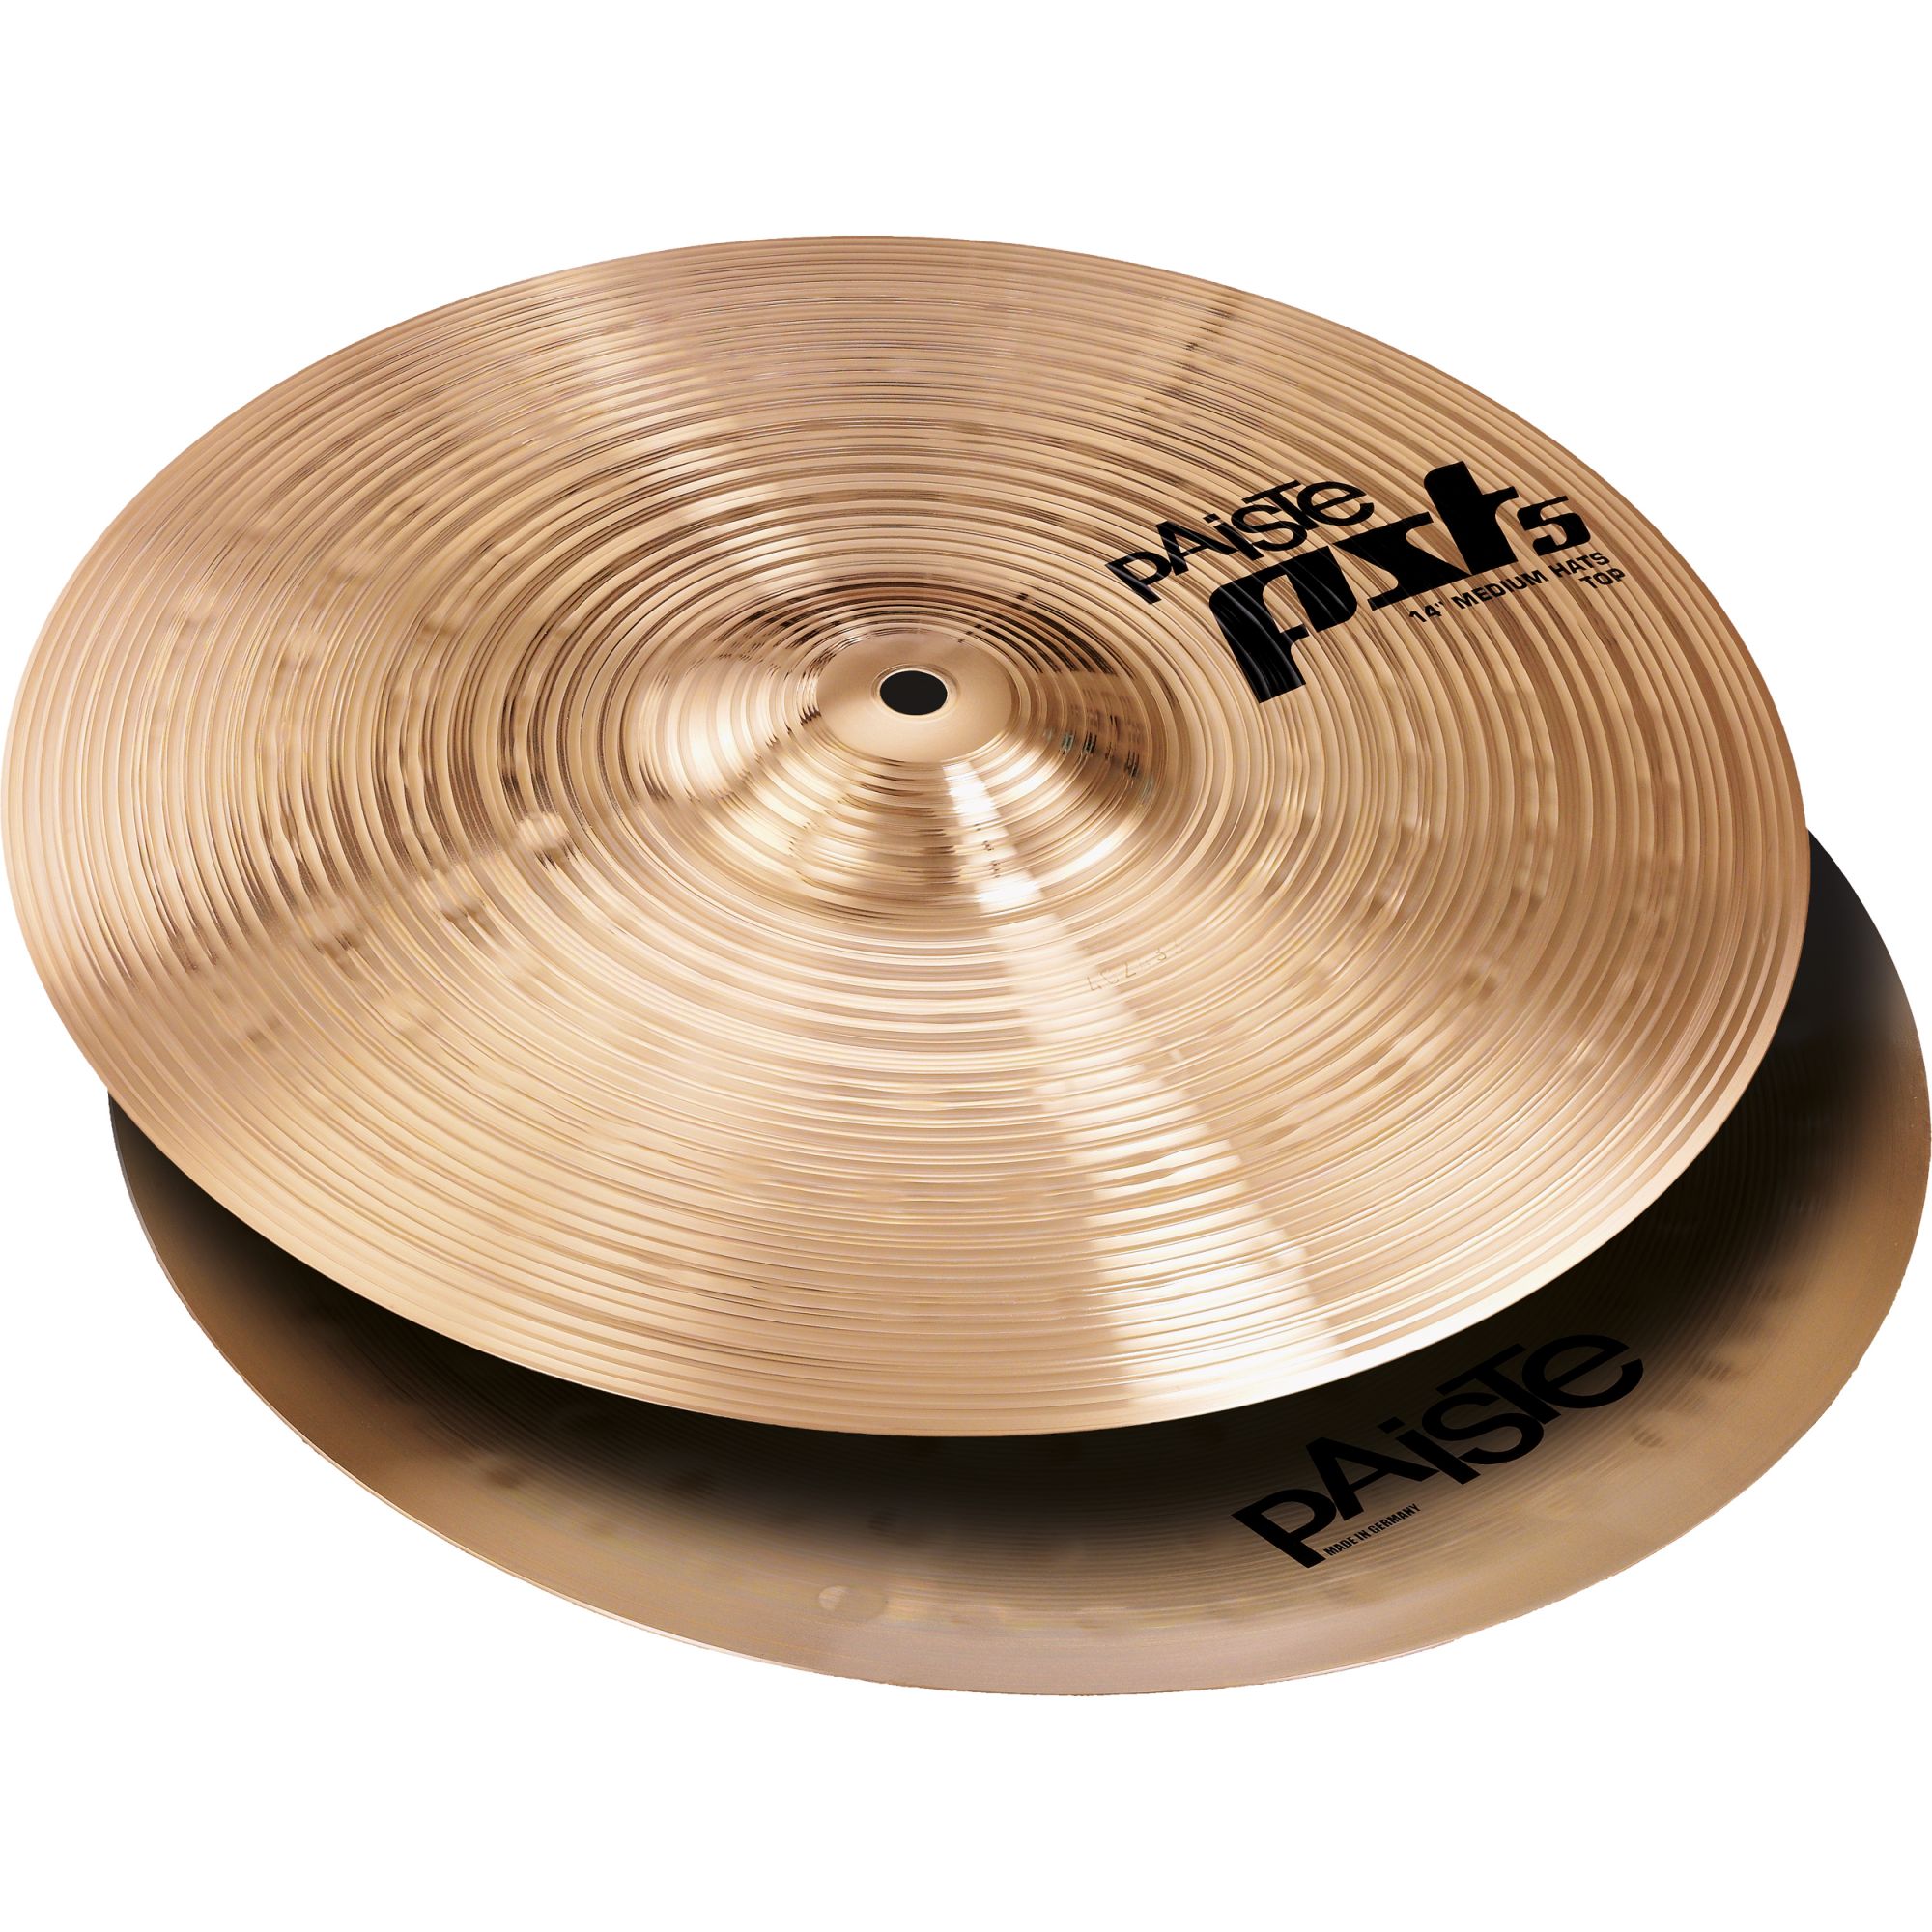 Buy Paiste PST5 14 inch cymbal cymbal online in  India